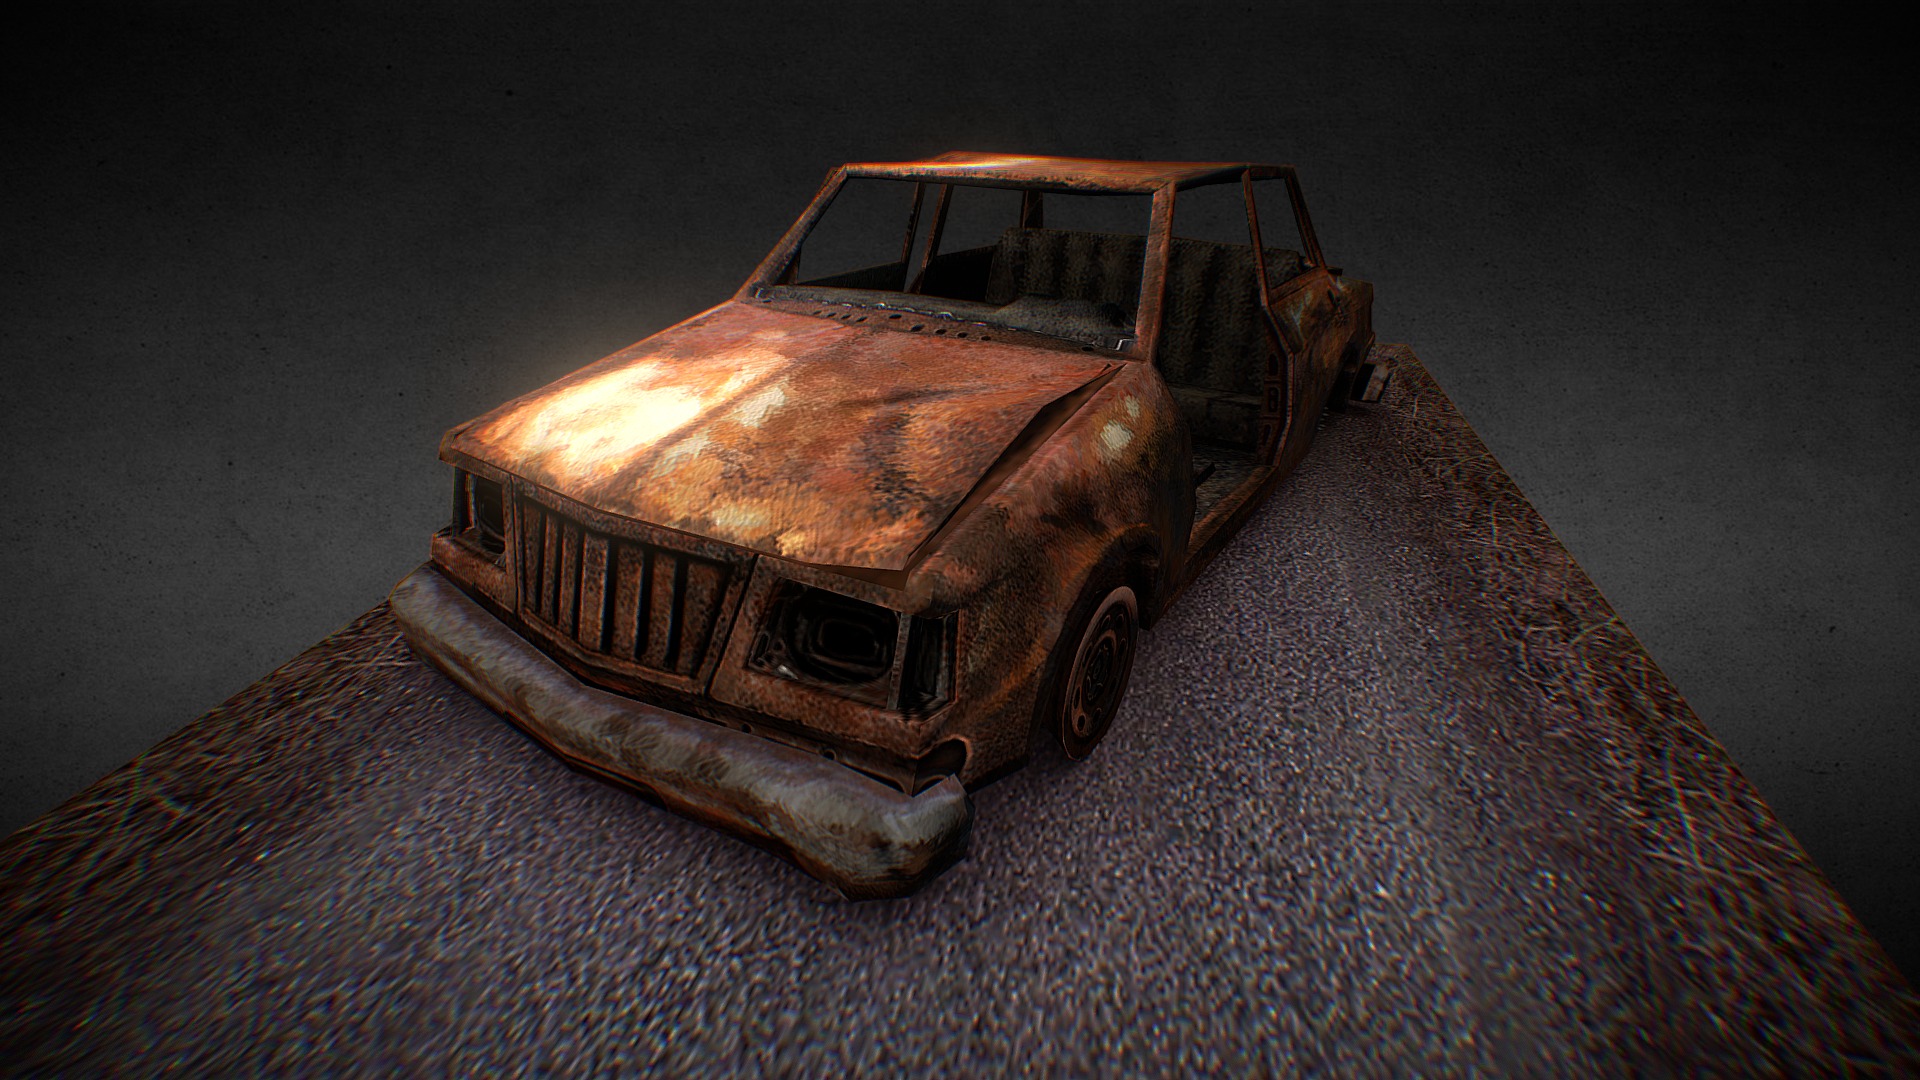 3D model Rusty Car - This is a 3D model of the Rusty Car. The 3D model is about a brown car on a carpet.